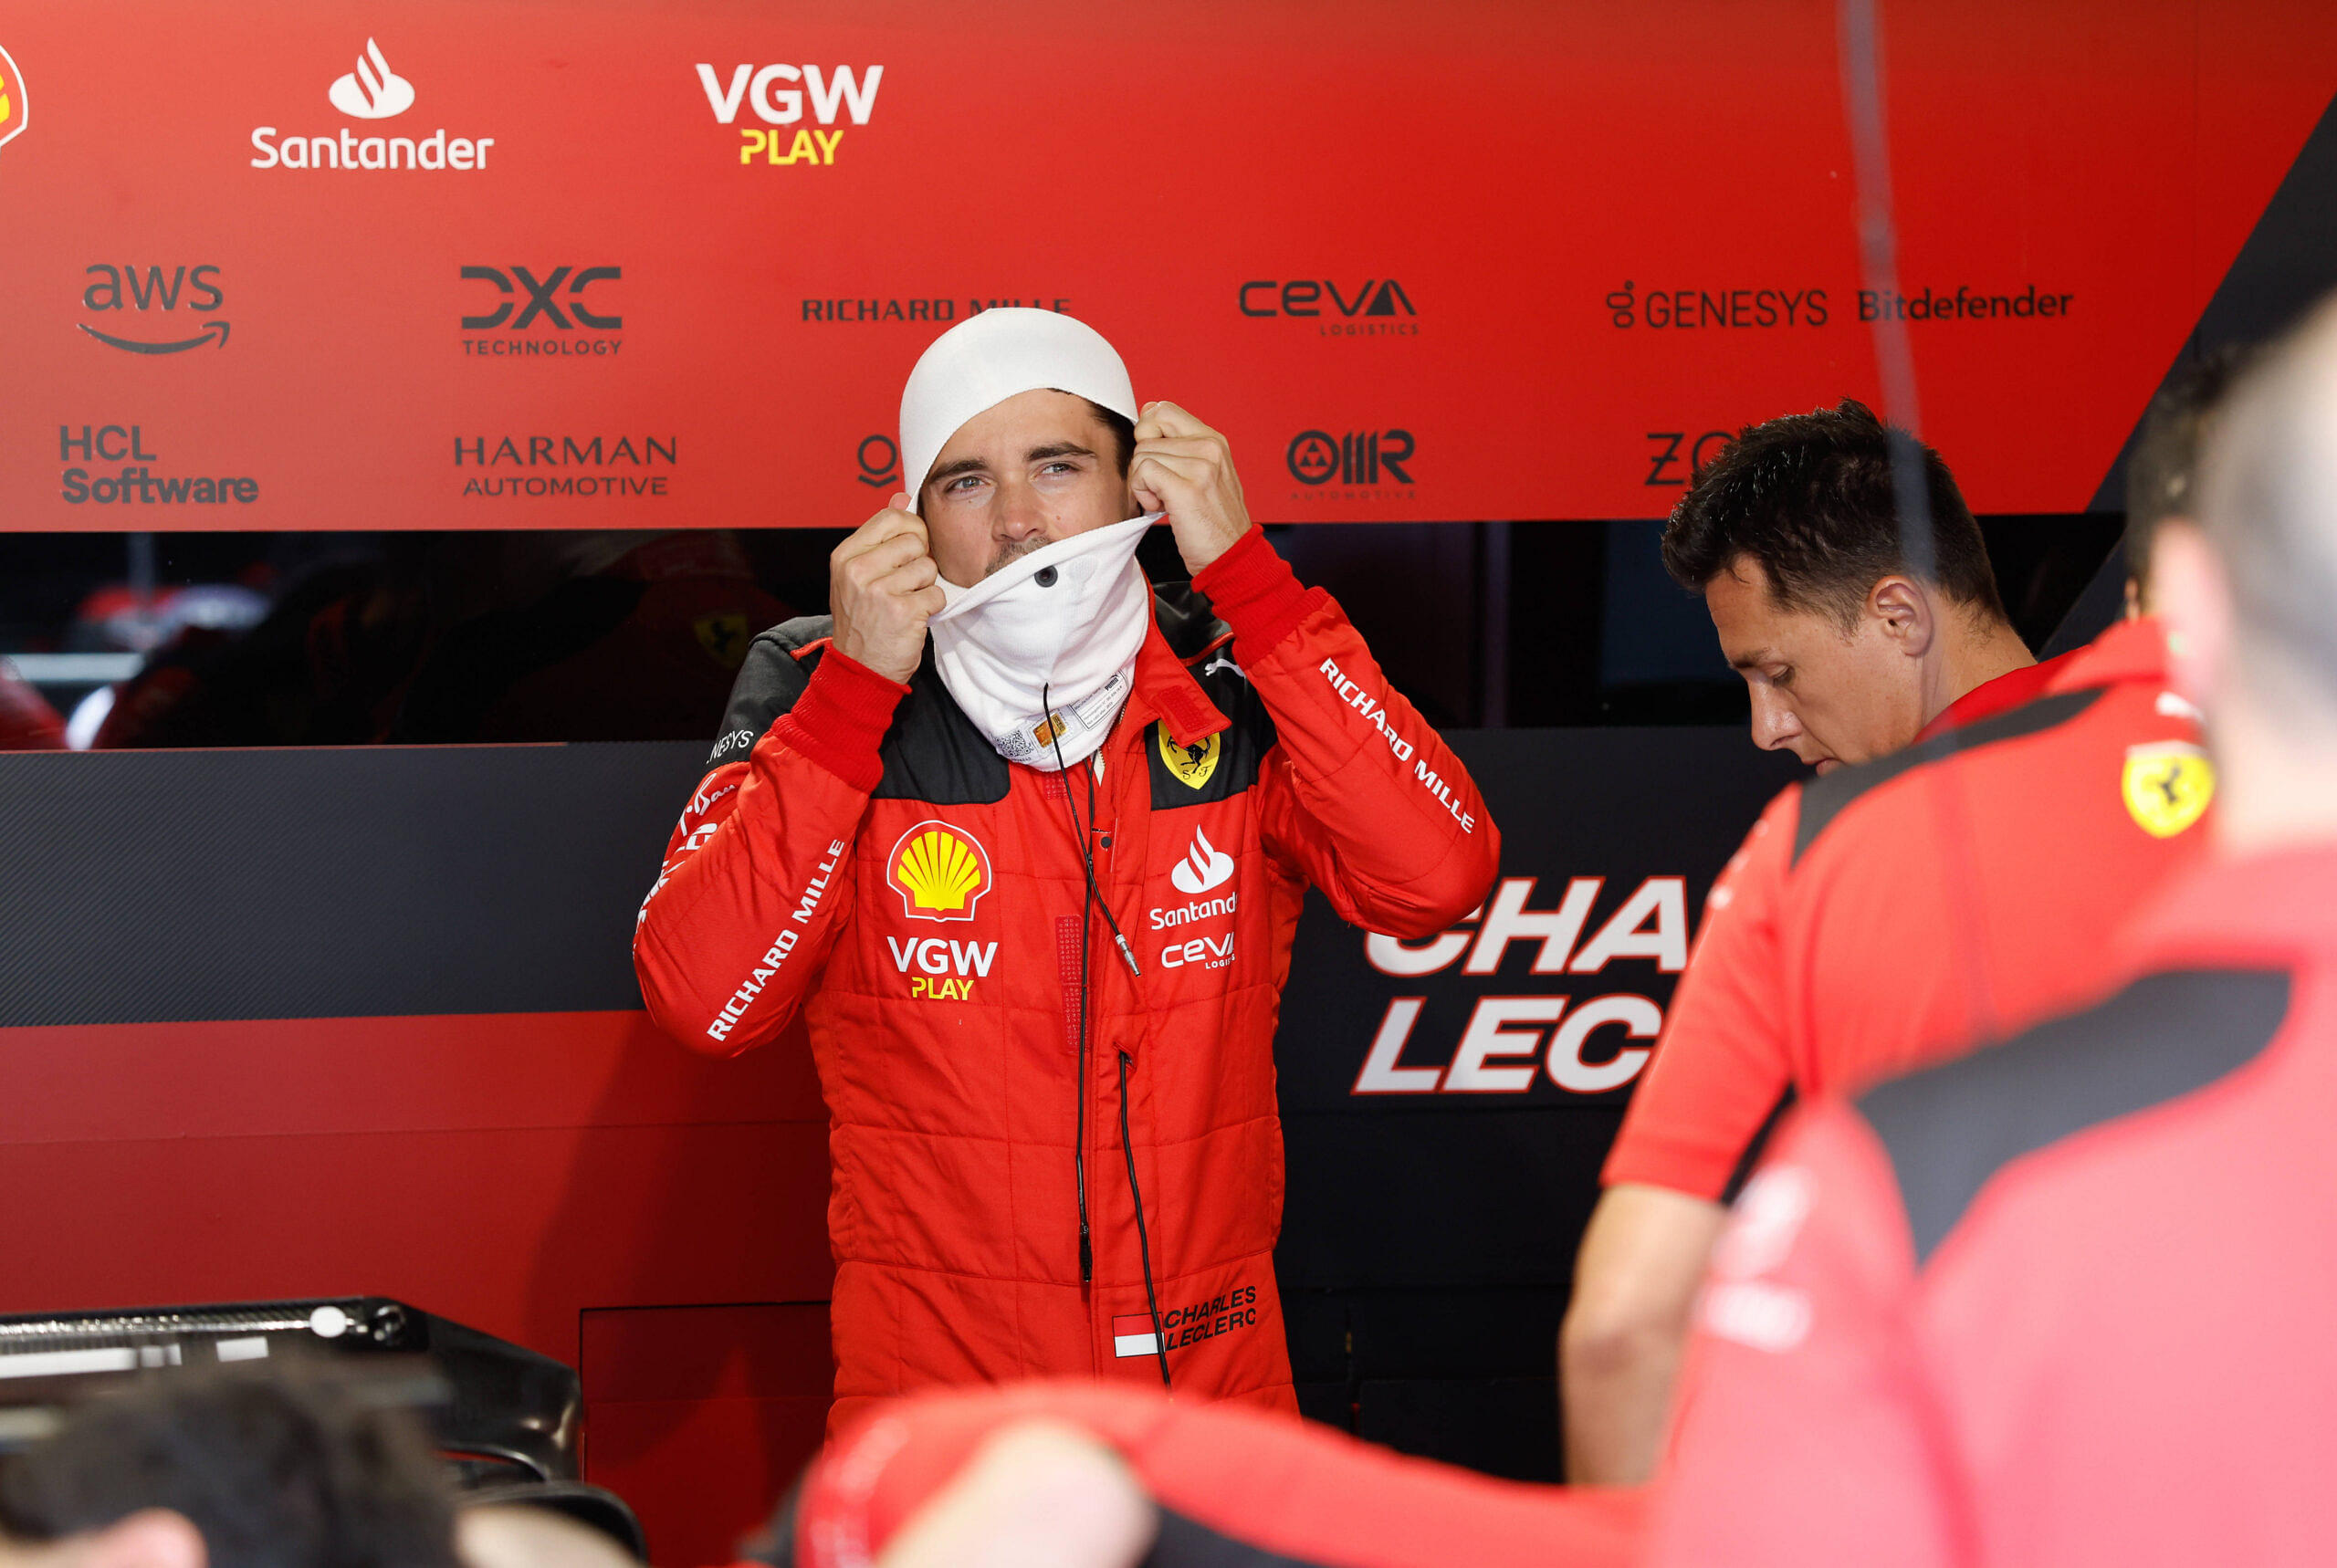 What Happened to Charles Leclerc Today at the Miami Grand Prix?